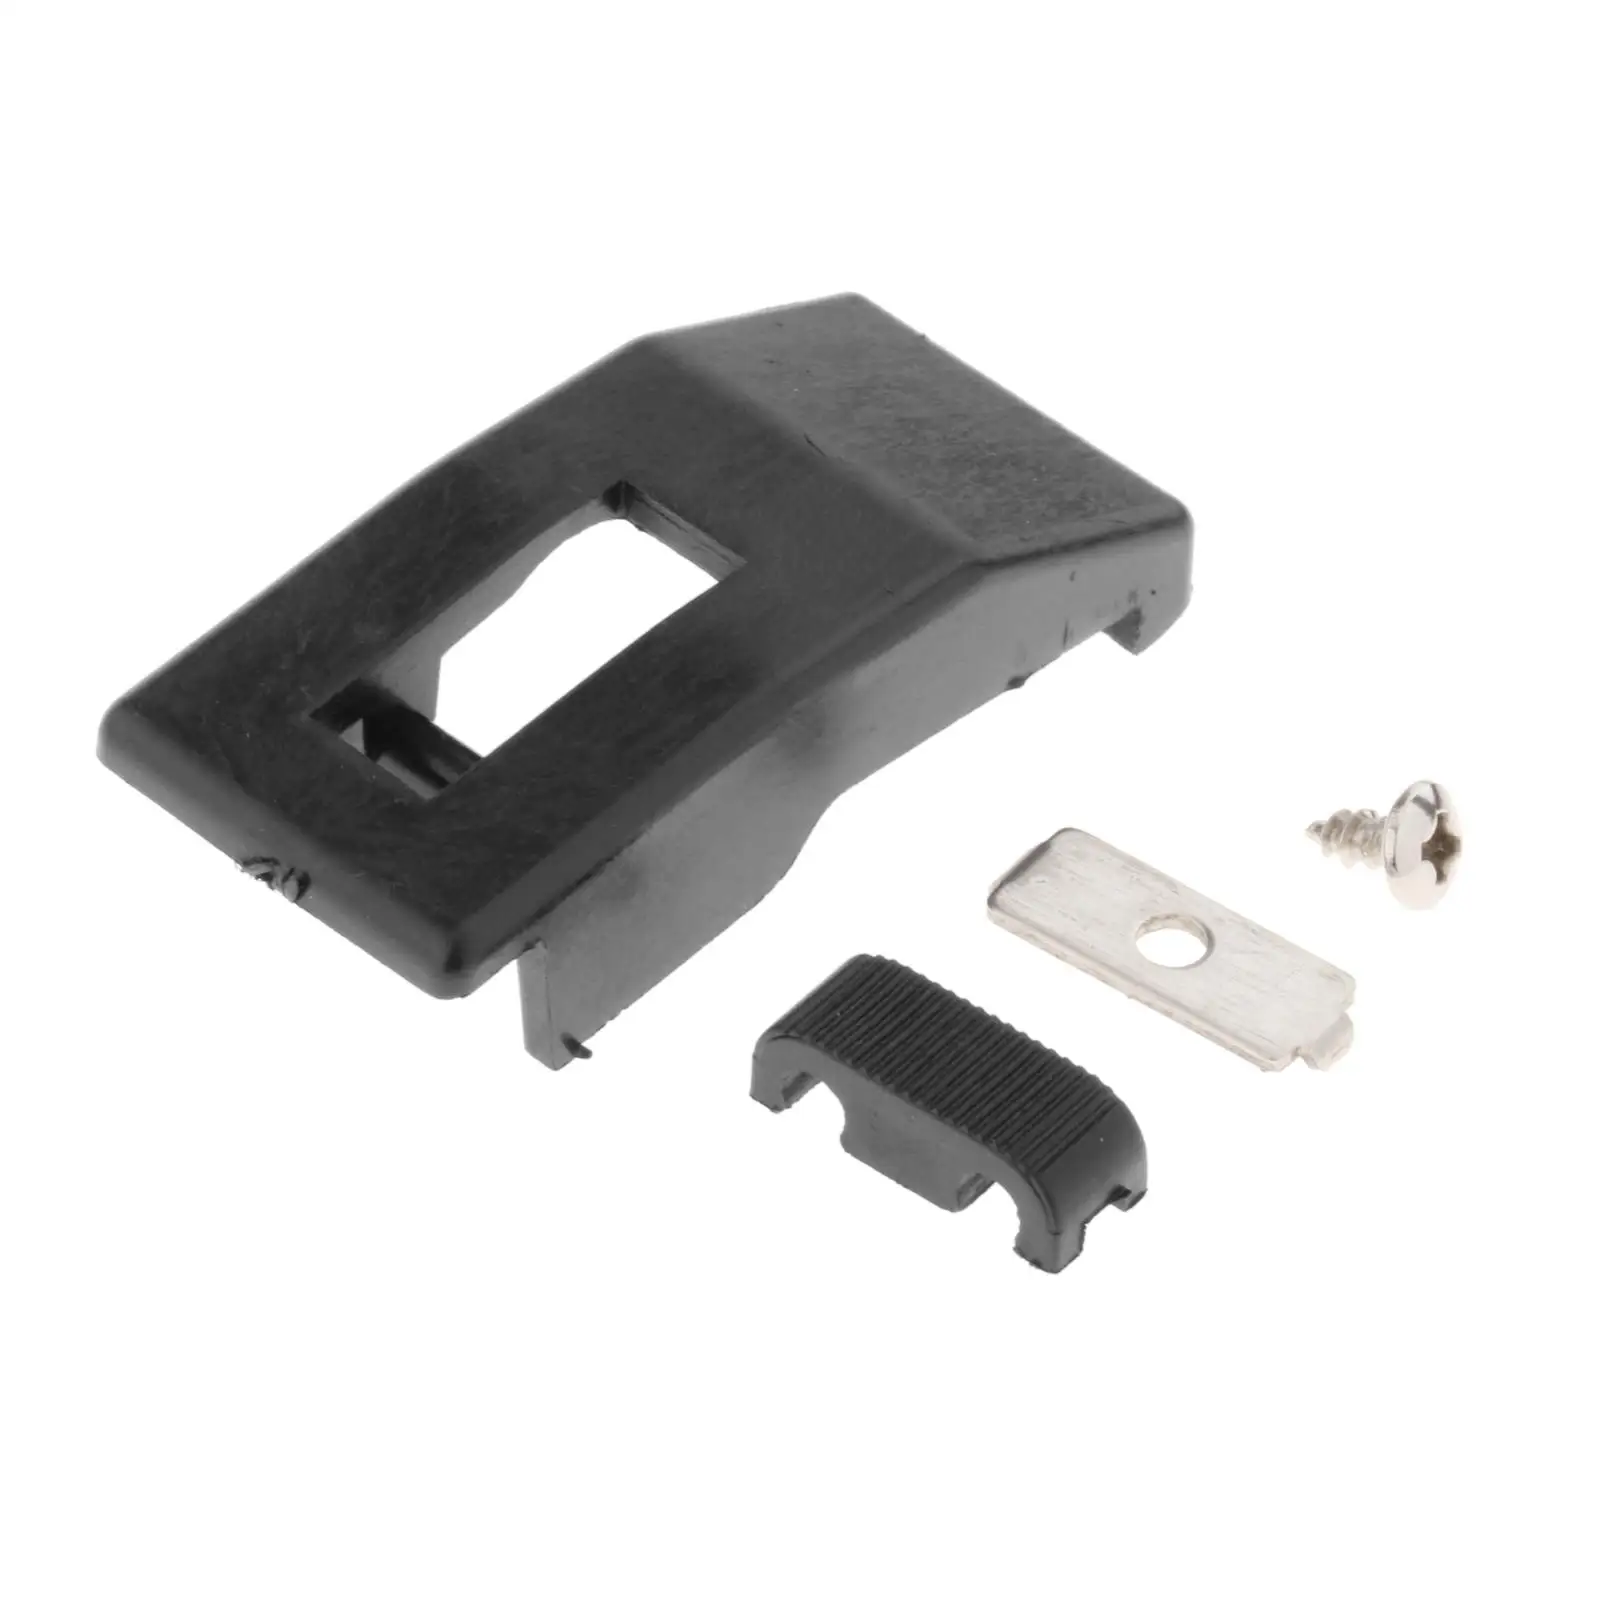 1 Set Holder Clamp Band Cowling Cover Clip Fit for Yamaha Outboard 2T 3HP F4HP 4 Stroke 6L5-42647 6L542647 Boat Parts